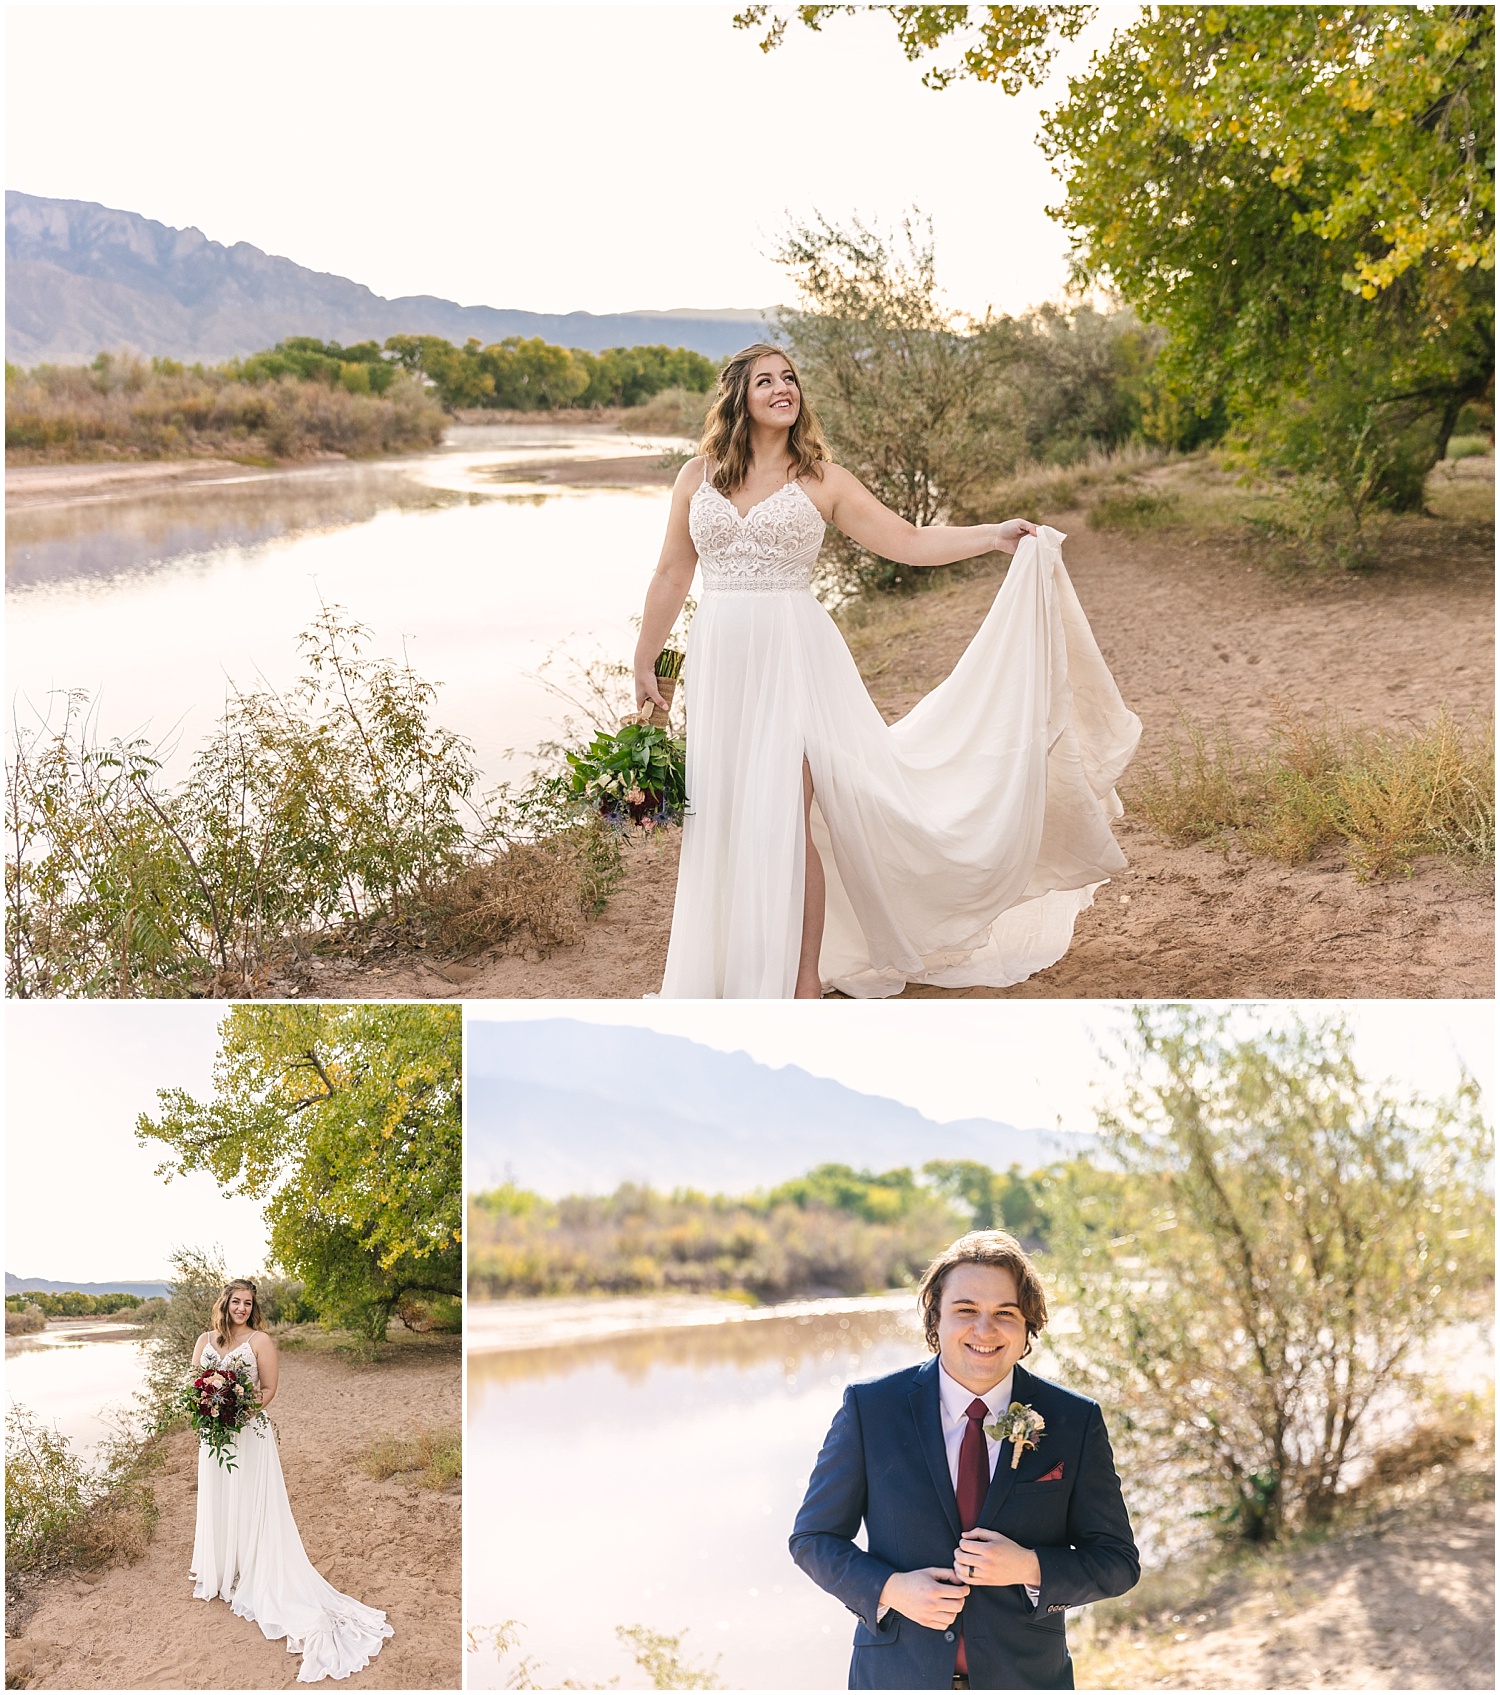 Bride holding long flowy skirt and groom in navy suit for Albuquerque elopement